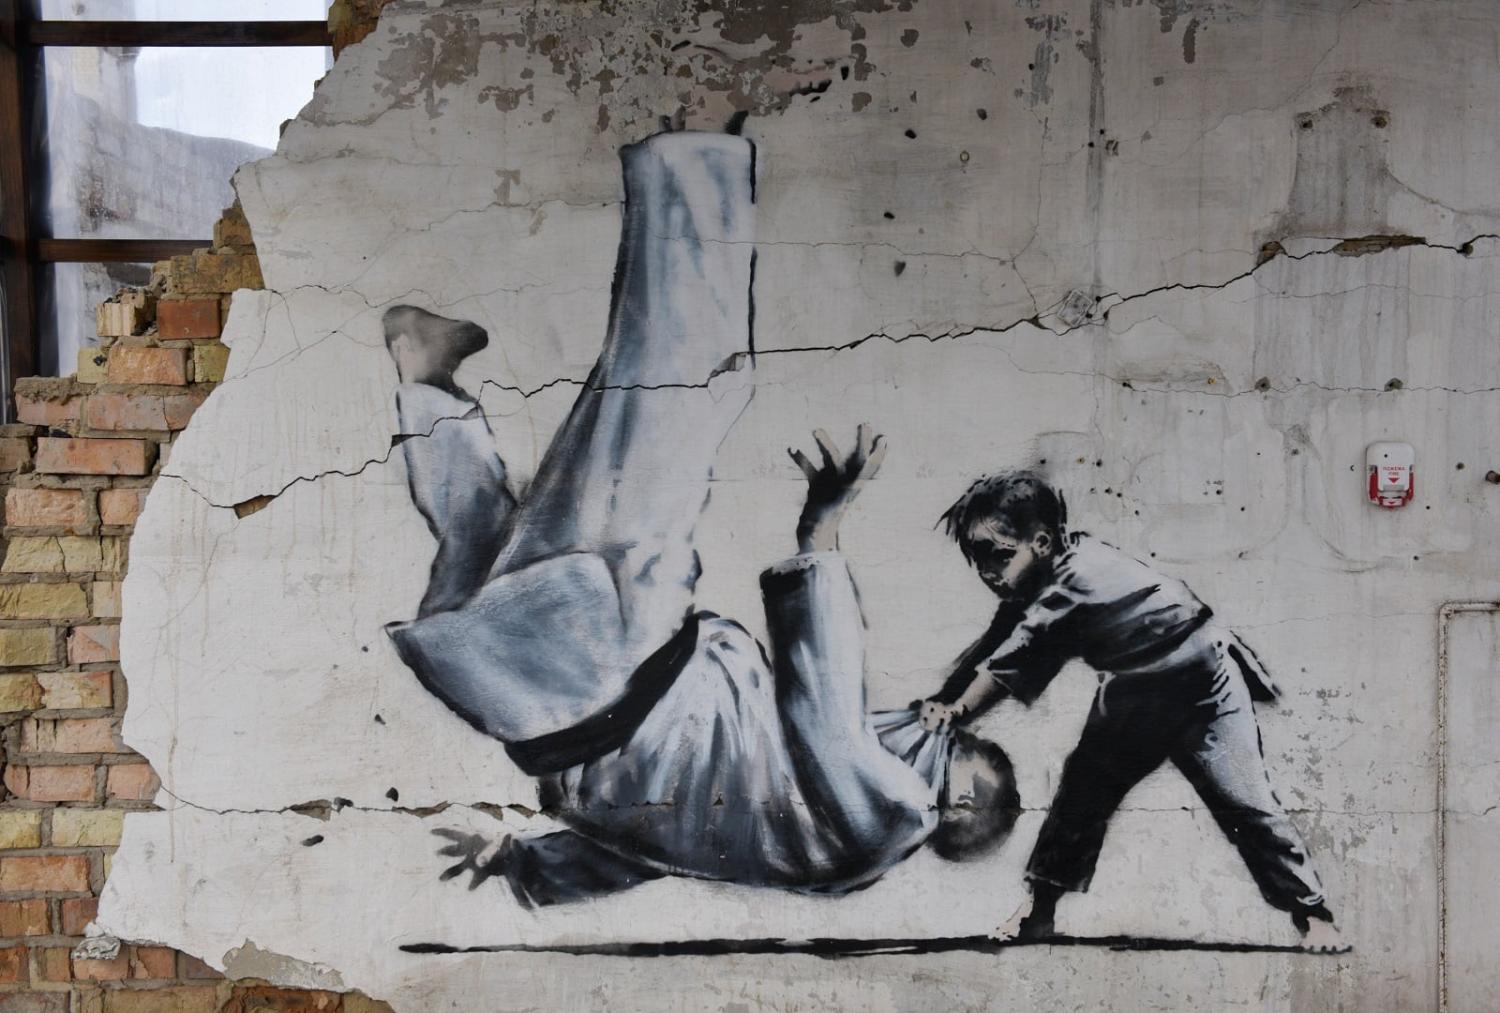 The graffiti work of English artist Banksy on a wall destroyed when the Russian Federation attacked the city of Borodyanka in Ukraine, 26 February 2023 (Maksym Polishchuk/SOPA Images/LightRocket via Getty Images)